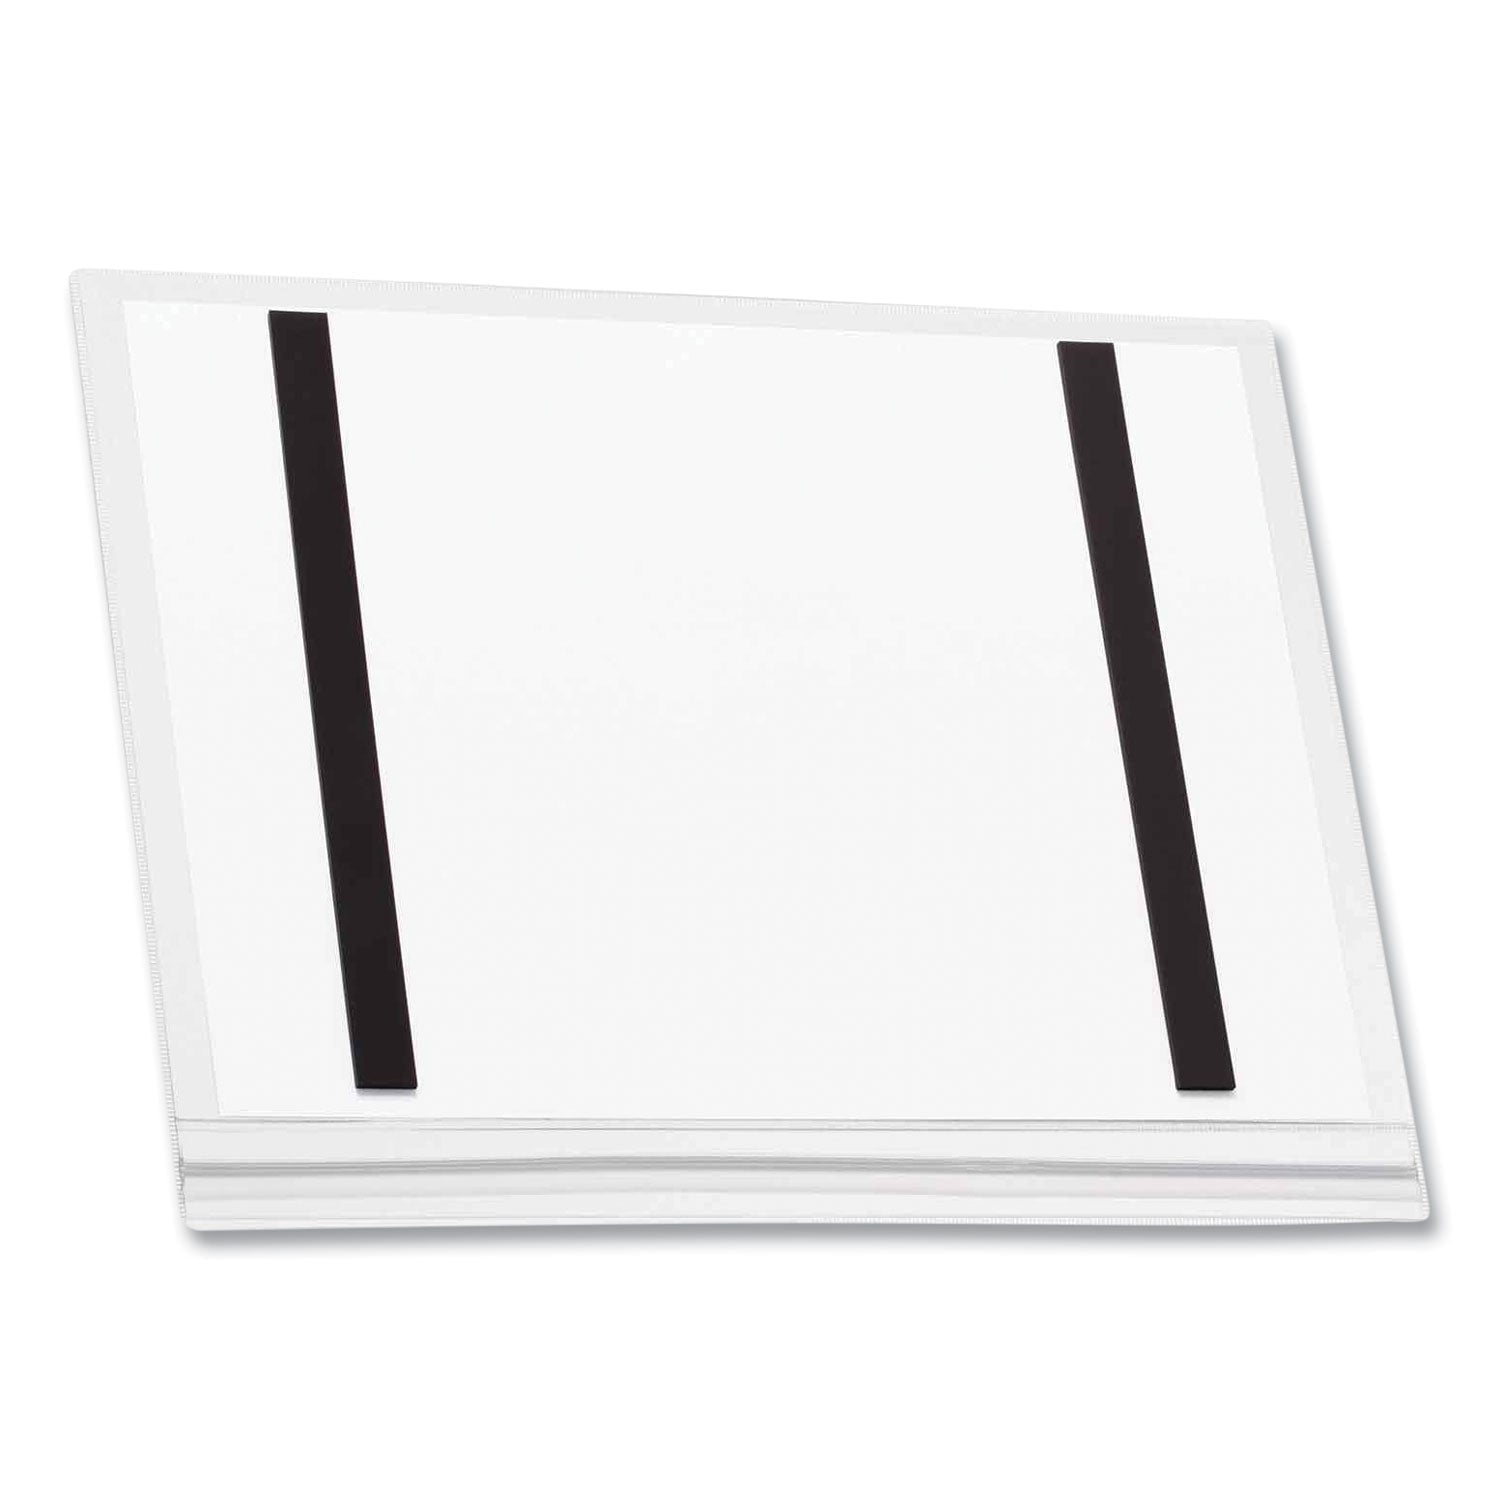 magnetic-water-resistant-sign-holder-85-x-11-clear-frame-5-pack_dbl501819 - 4